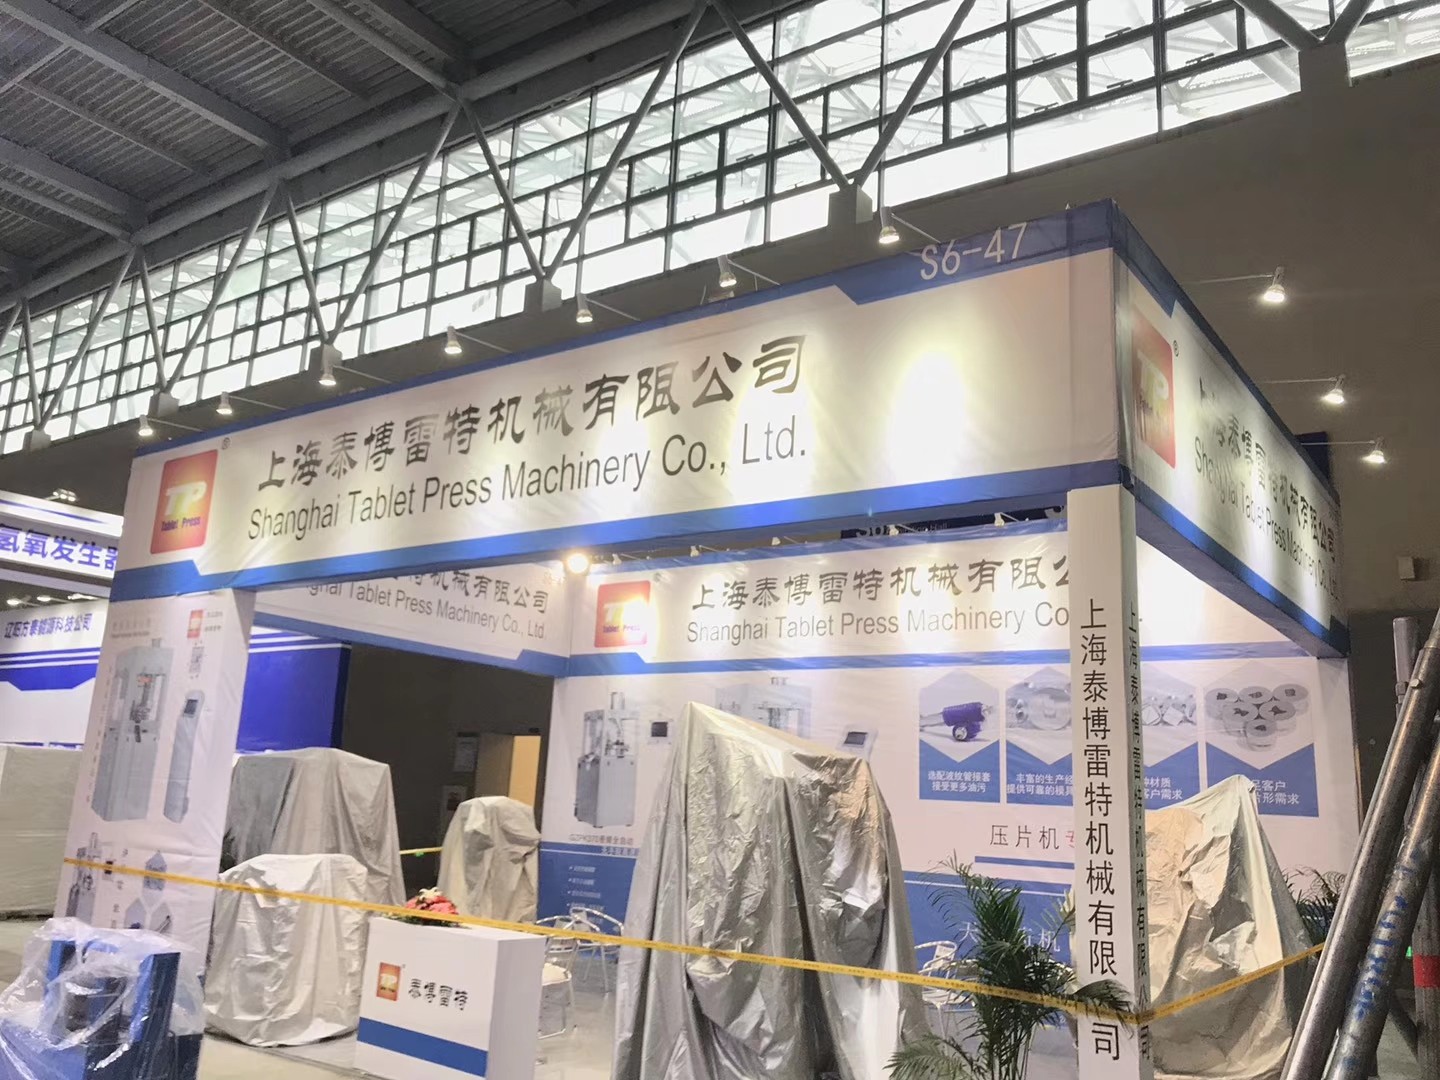 Shanghai Taberite tablet press manufacturer participated in the 56th Wuhan Pharmaceutical Machinery Exhibition